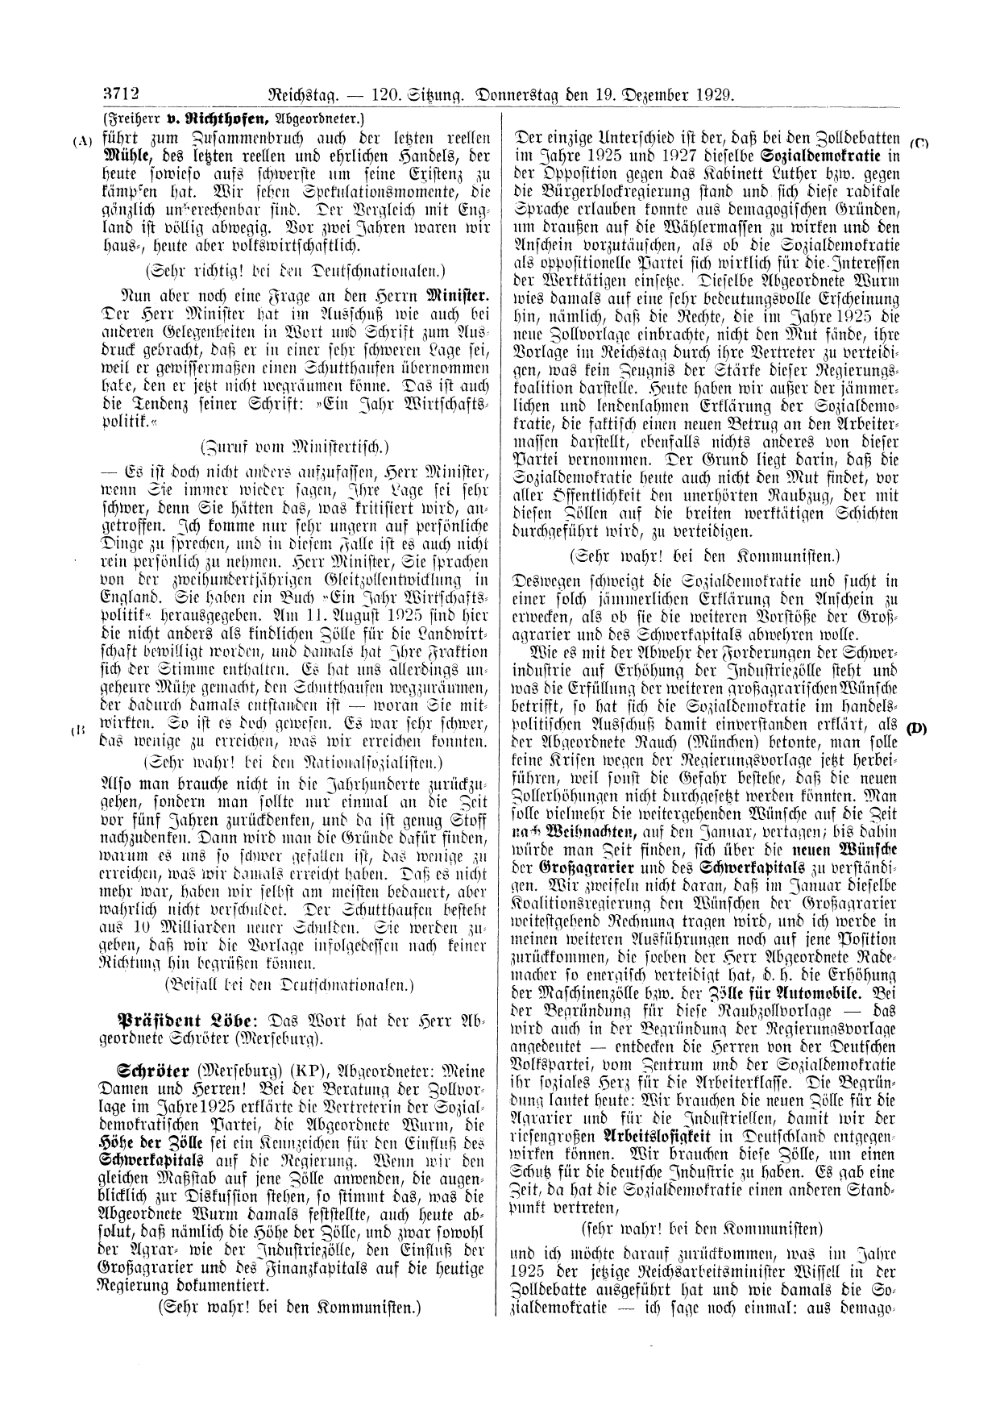 Scan of page 3712